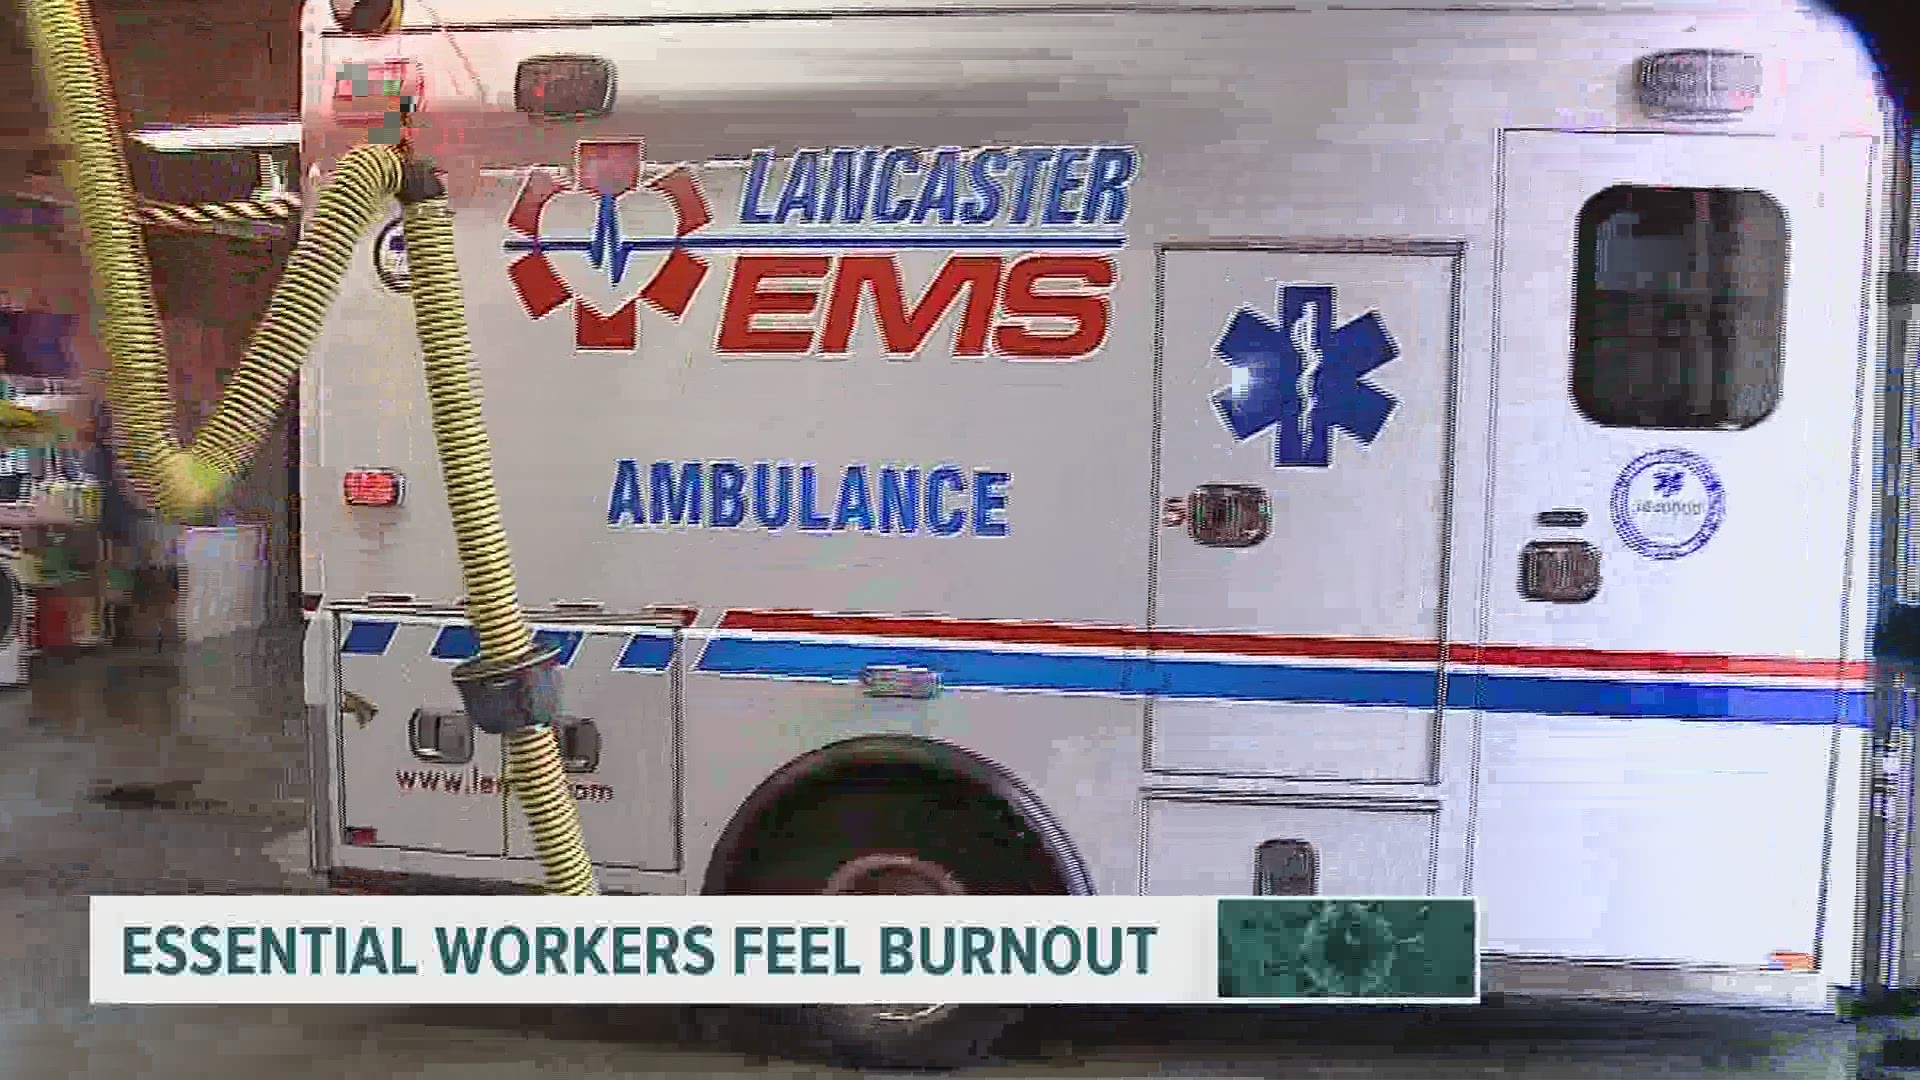 "We're at a 10. A 10 or above," responded Liz Empson, a LPN at a nursing home in Dauphin County, when asked about burnout level.